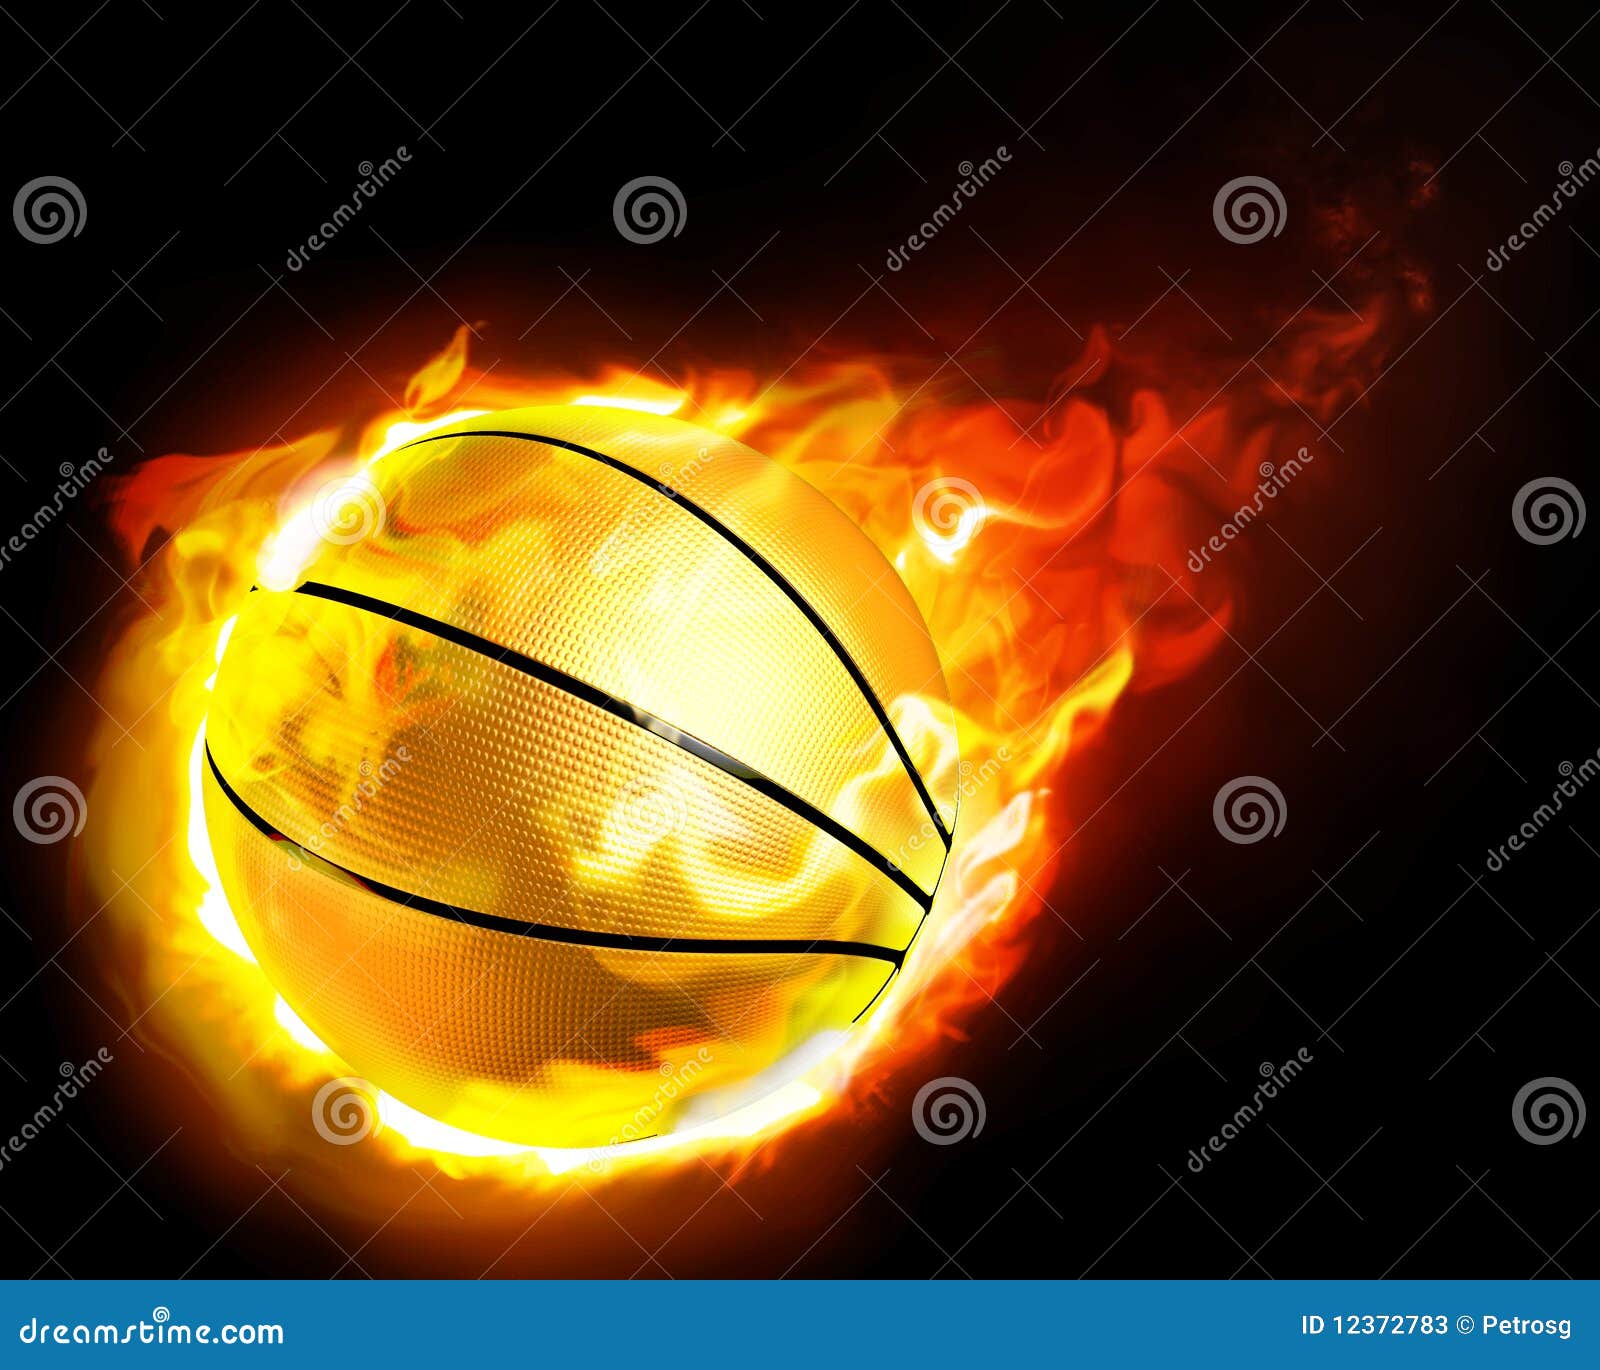 Flying Basketball On Fire Stock Photos - Image: 12372783